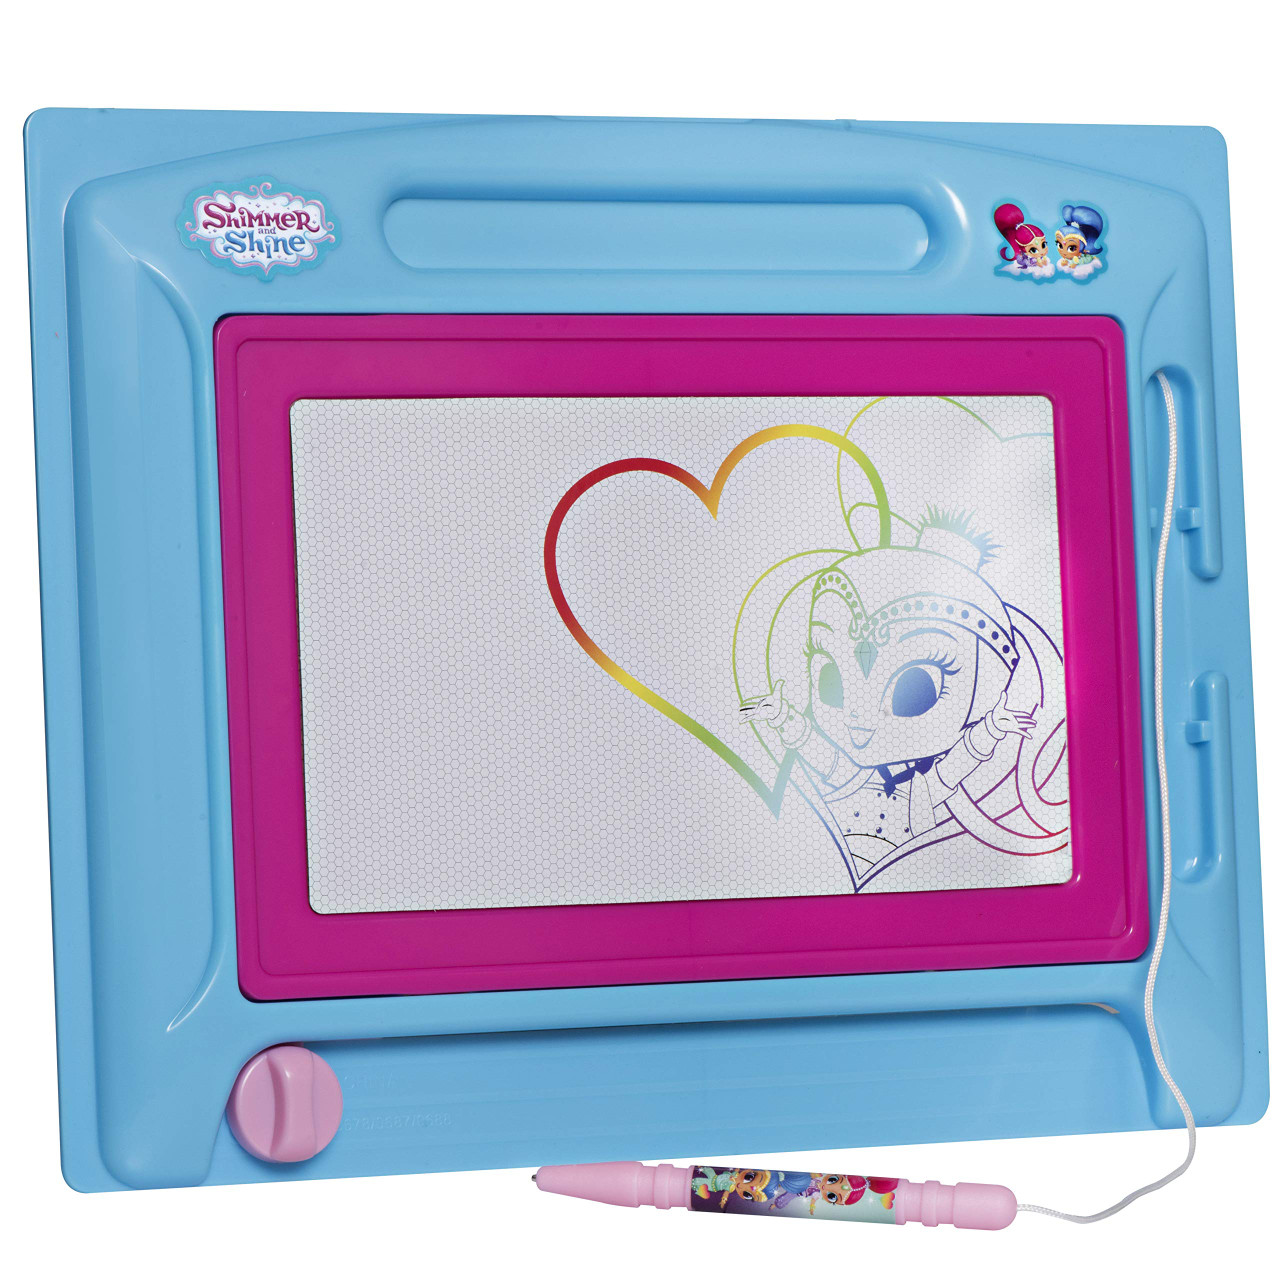 TMNT Magnetic Doodle Board - Etch a Sketch Classic, Magnetic